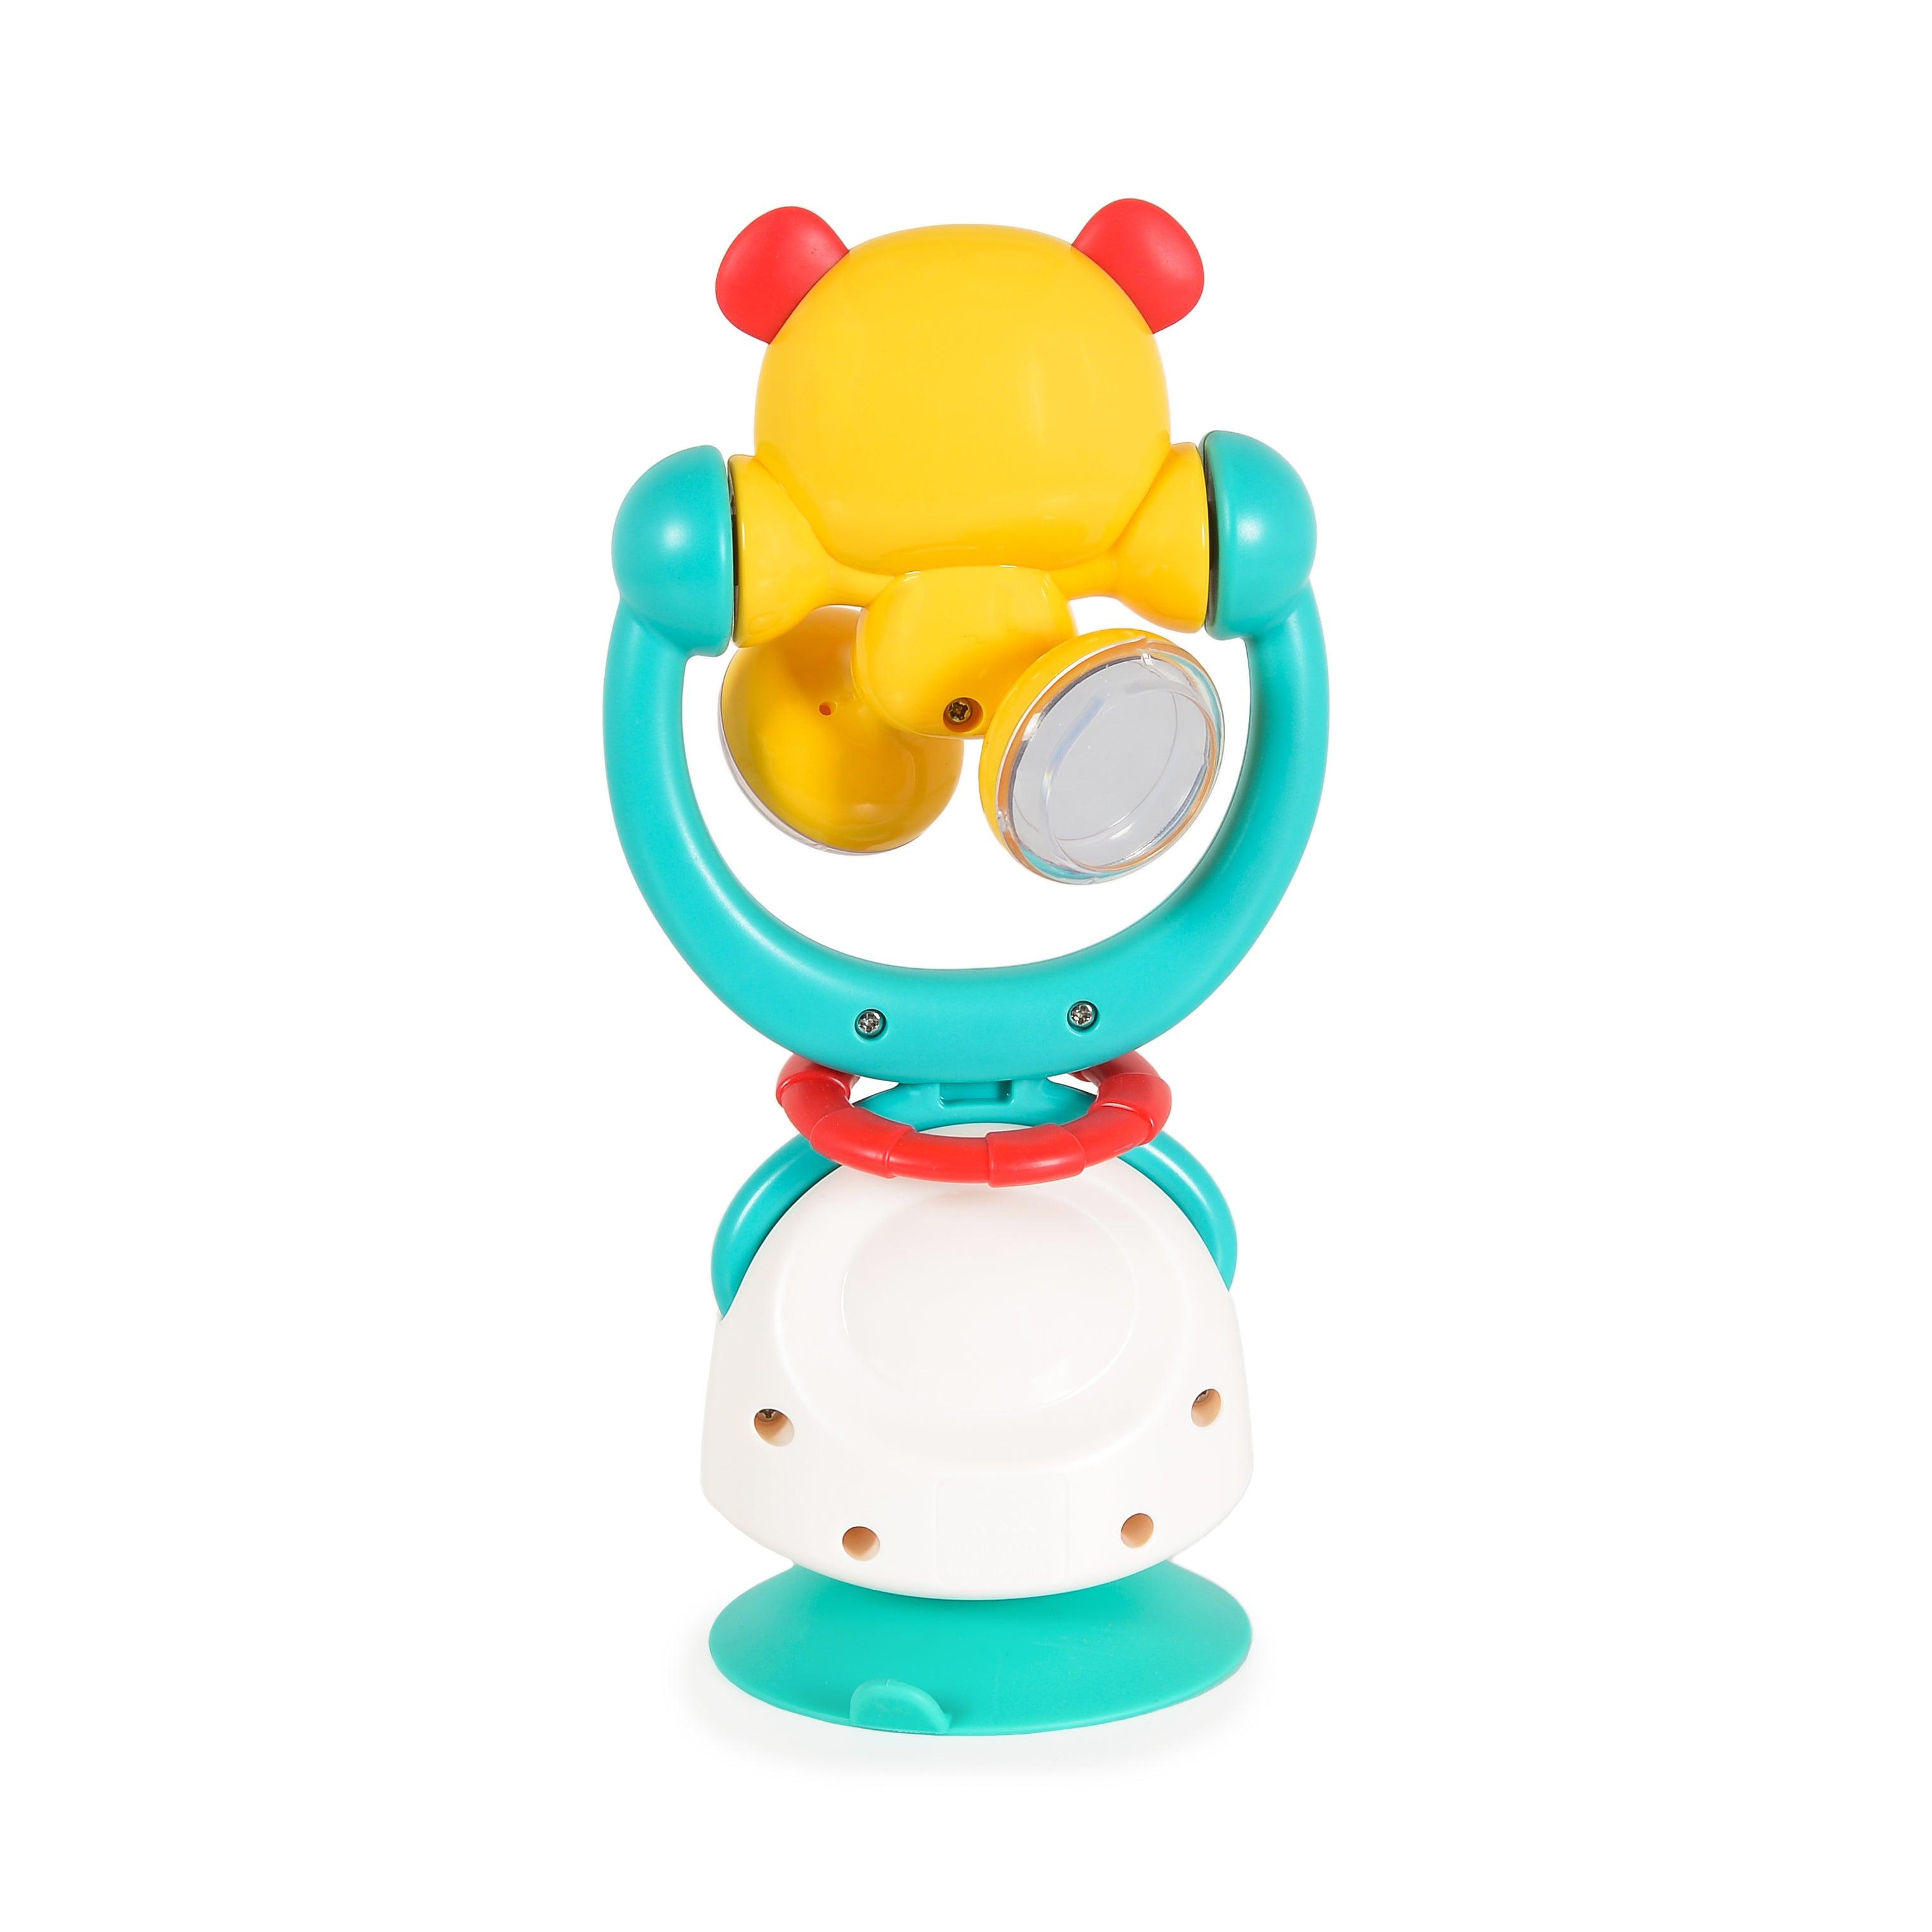 Cangaroo 2-in-1 high chair toy & rattle - Mari Kali Stores Cyprus